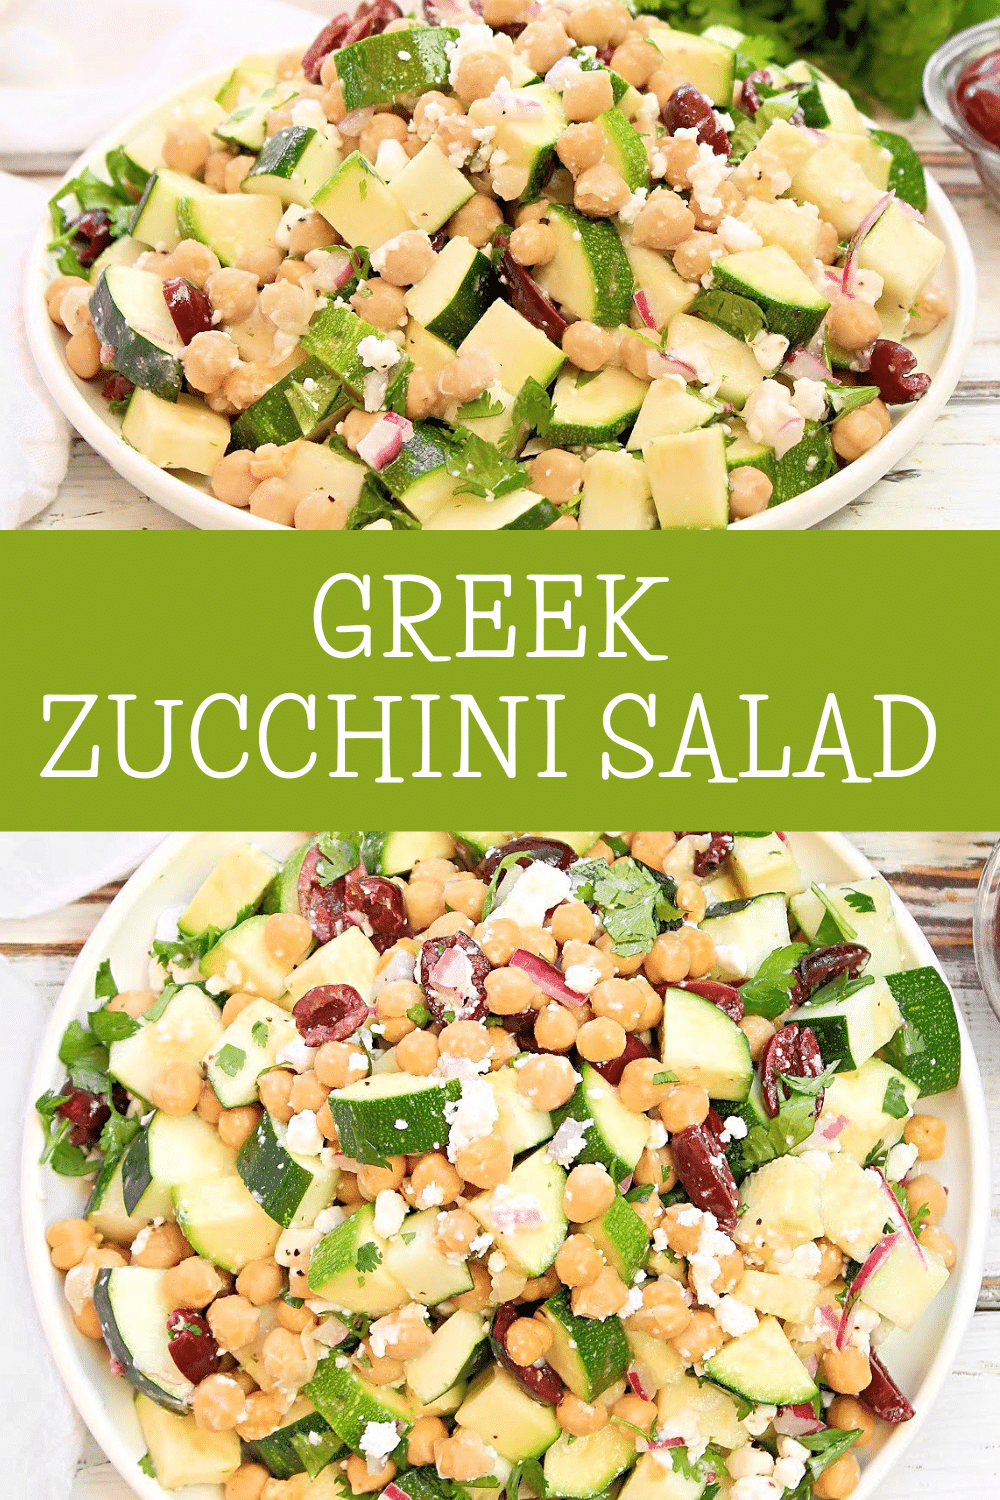 Greek Zucchini Salad ~ A light and refreshing summer salad that showcases the flavors of garden-fresh zucchini! via @thiswifecooks